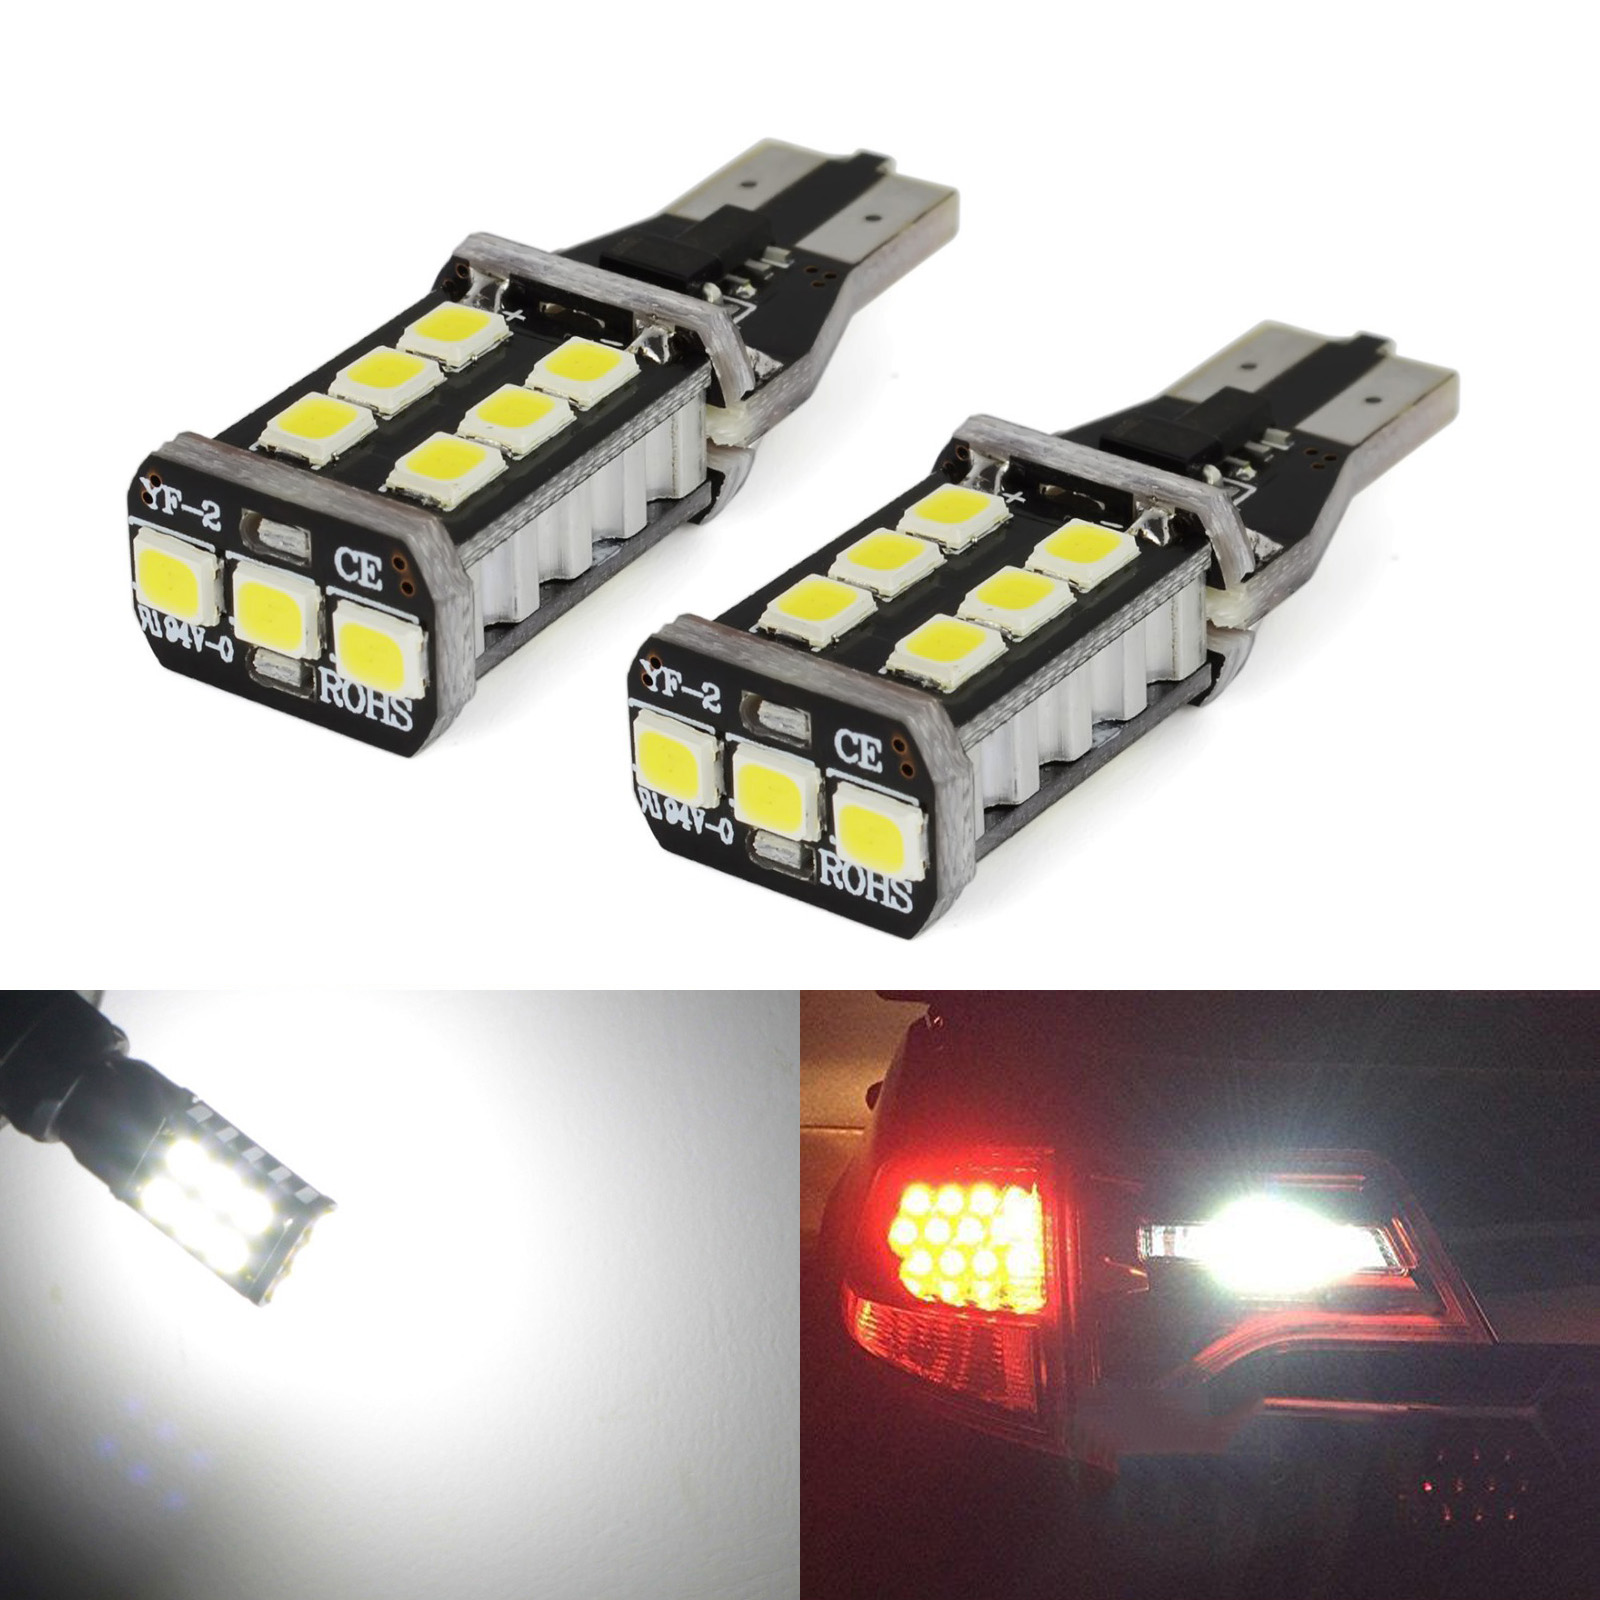 4x W16W T15 921 Rear 15 SMD LED Canbus REVERSE WHITE Lamps Light Bulbs 6000K